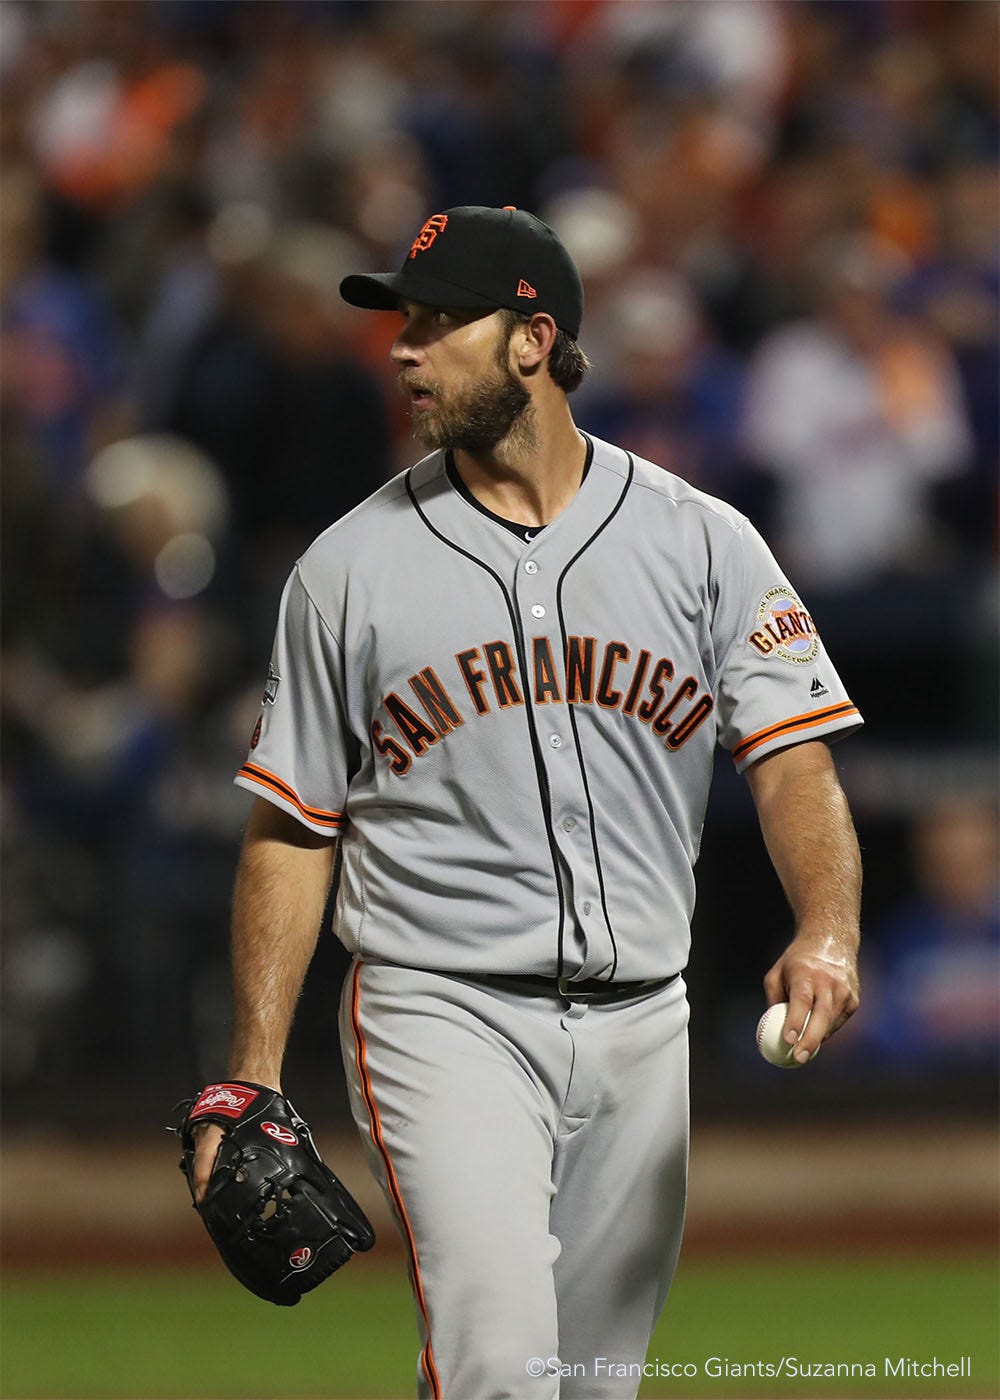 Madison Bumgarner leaves the field after catching a ball lined by Adsdrubal Cabrera to end the eighth inning.